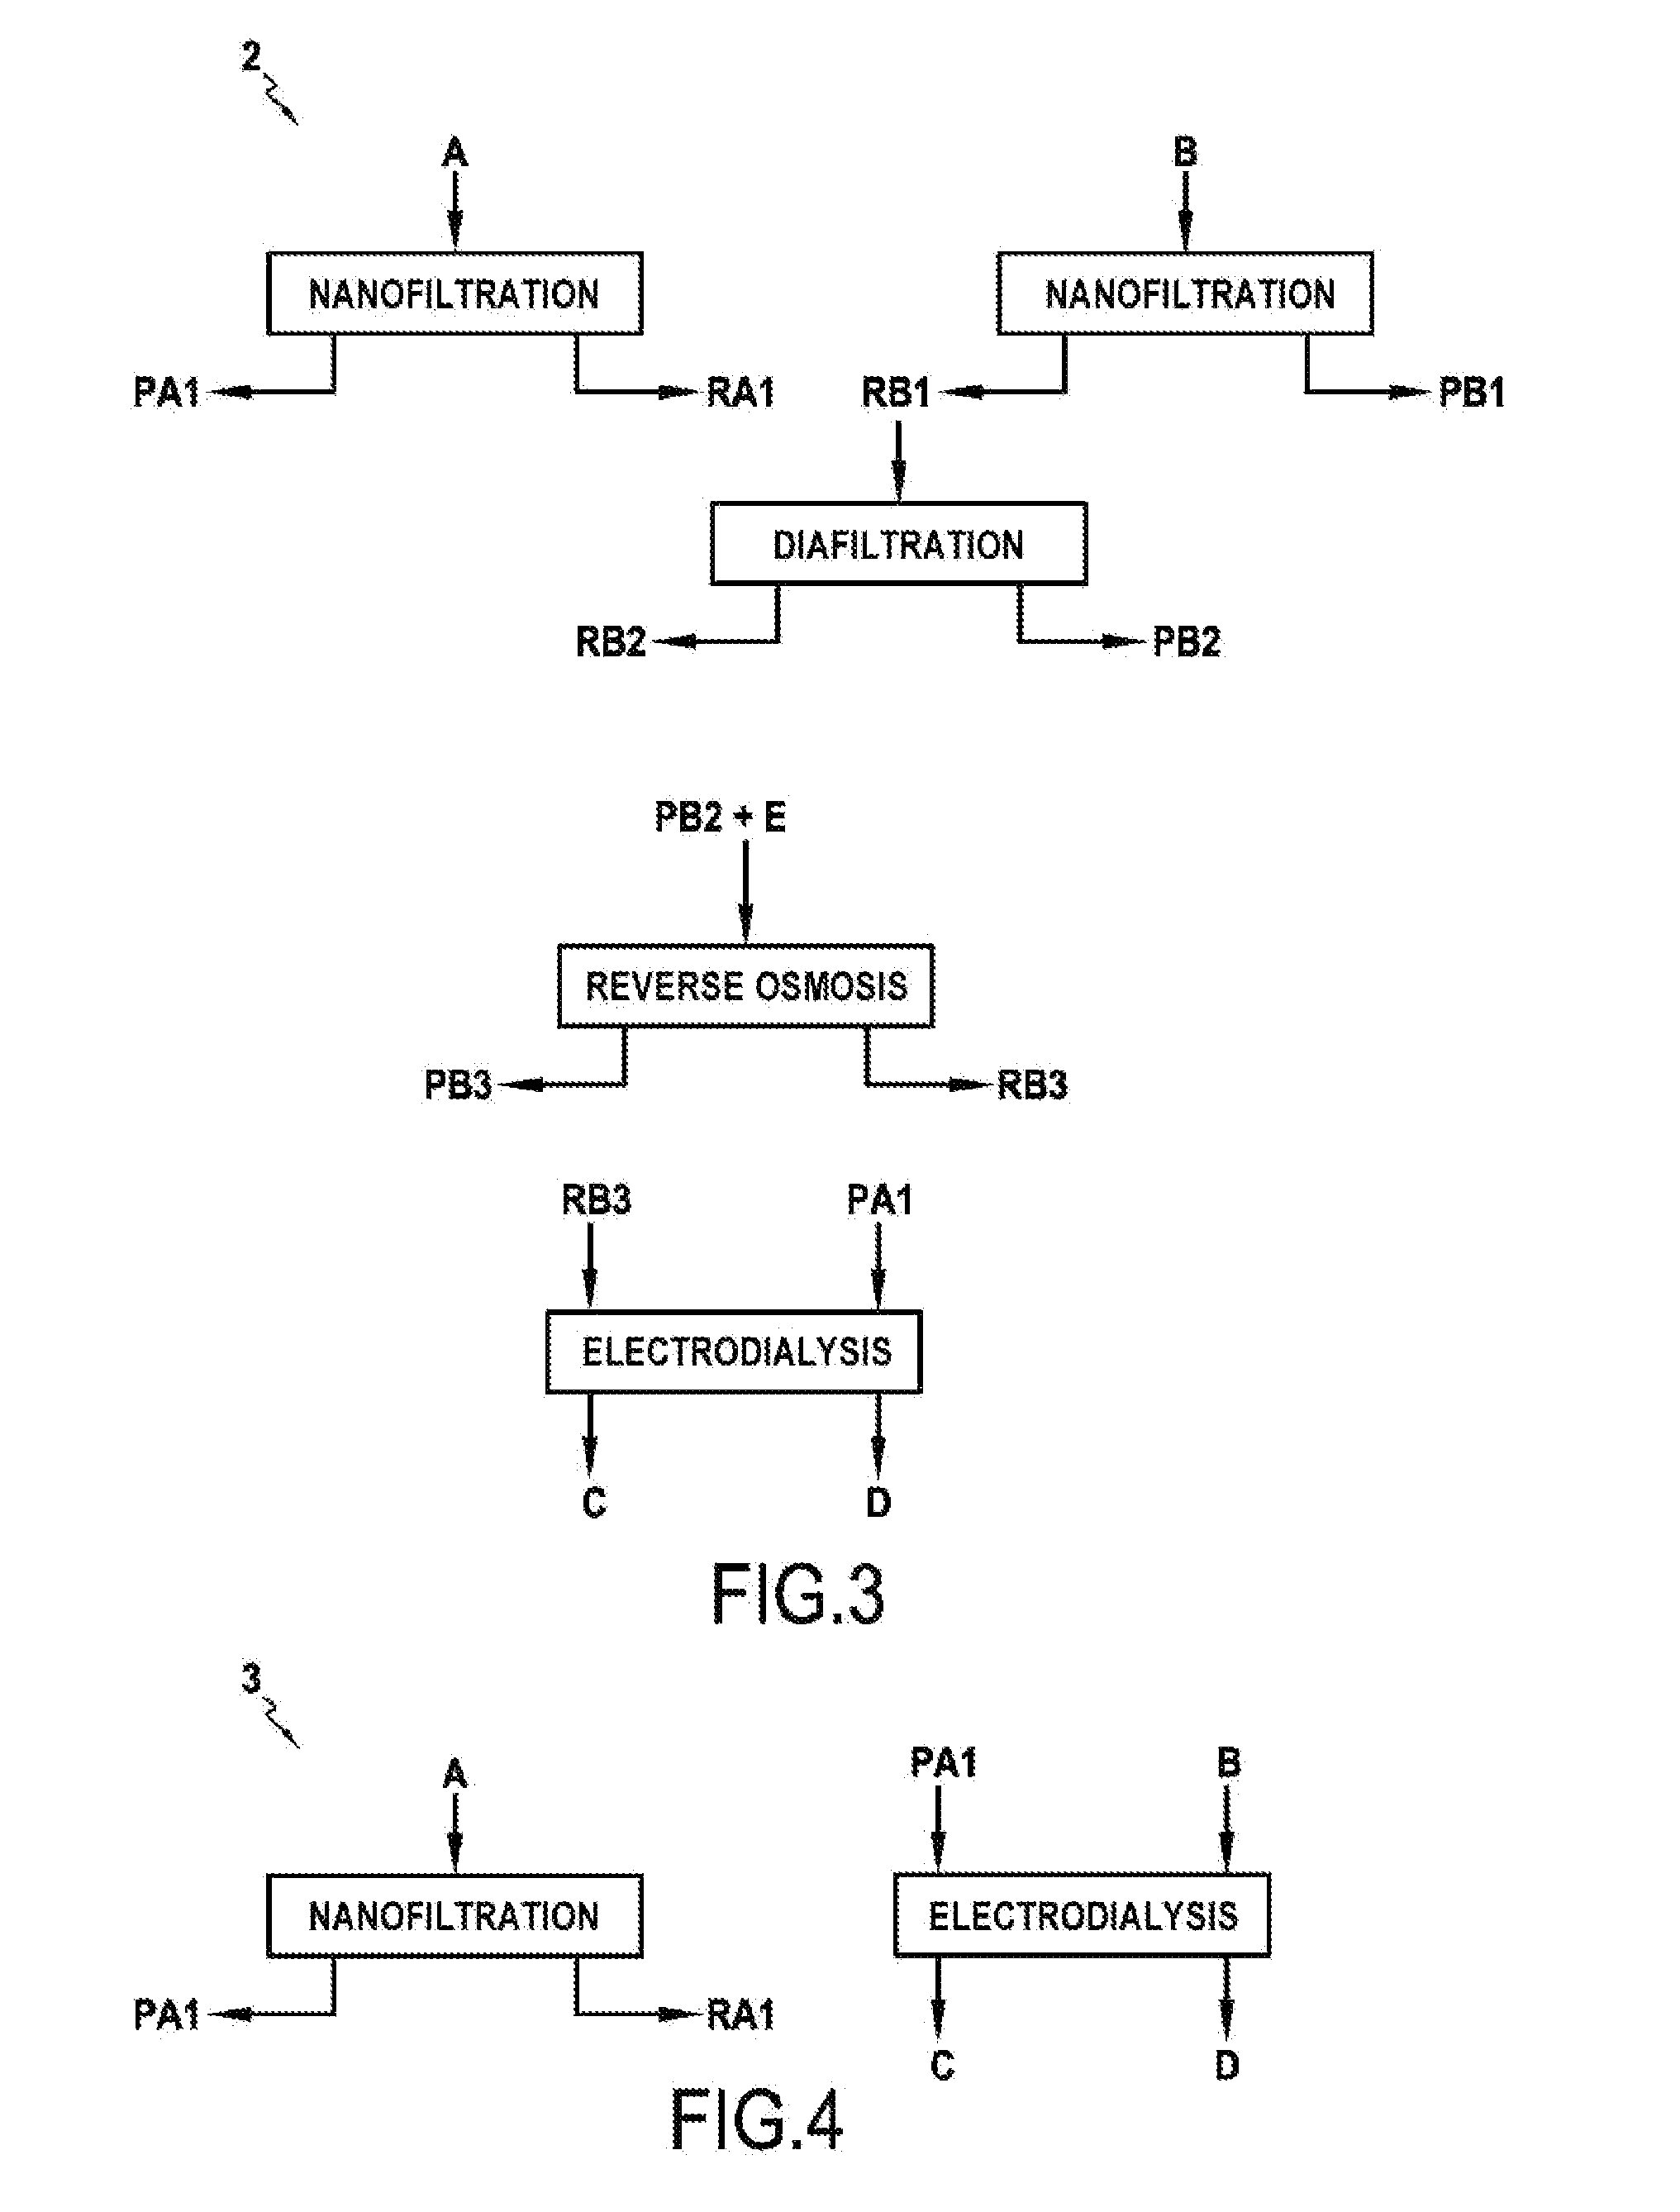 Method for recirculating a reprocessing effluent comprising chloride ions